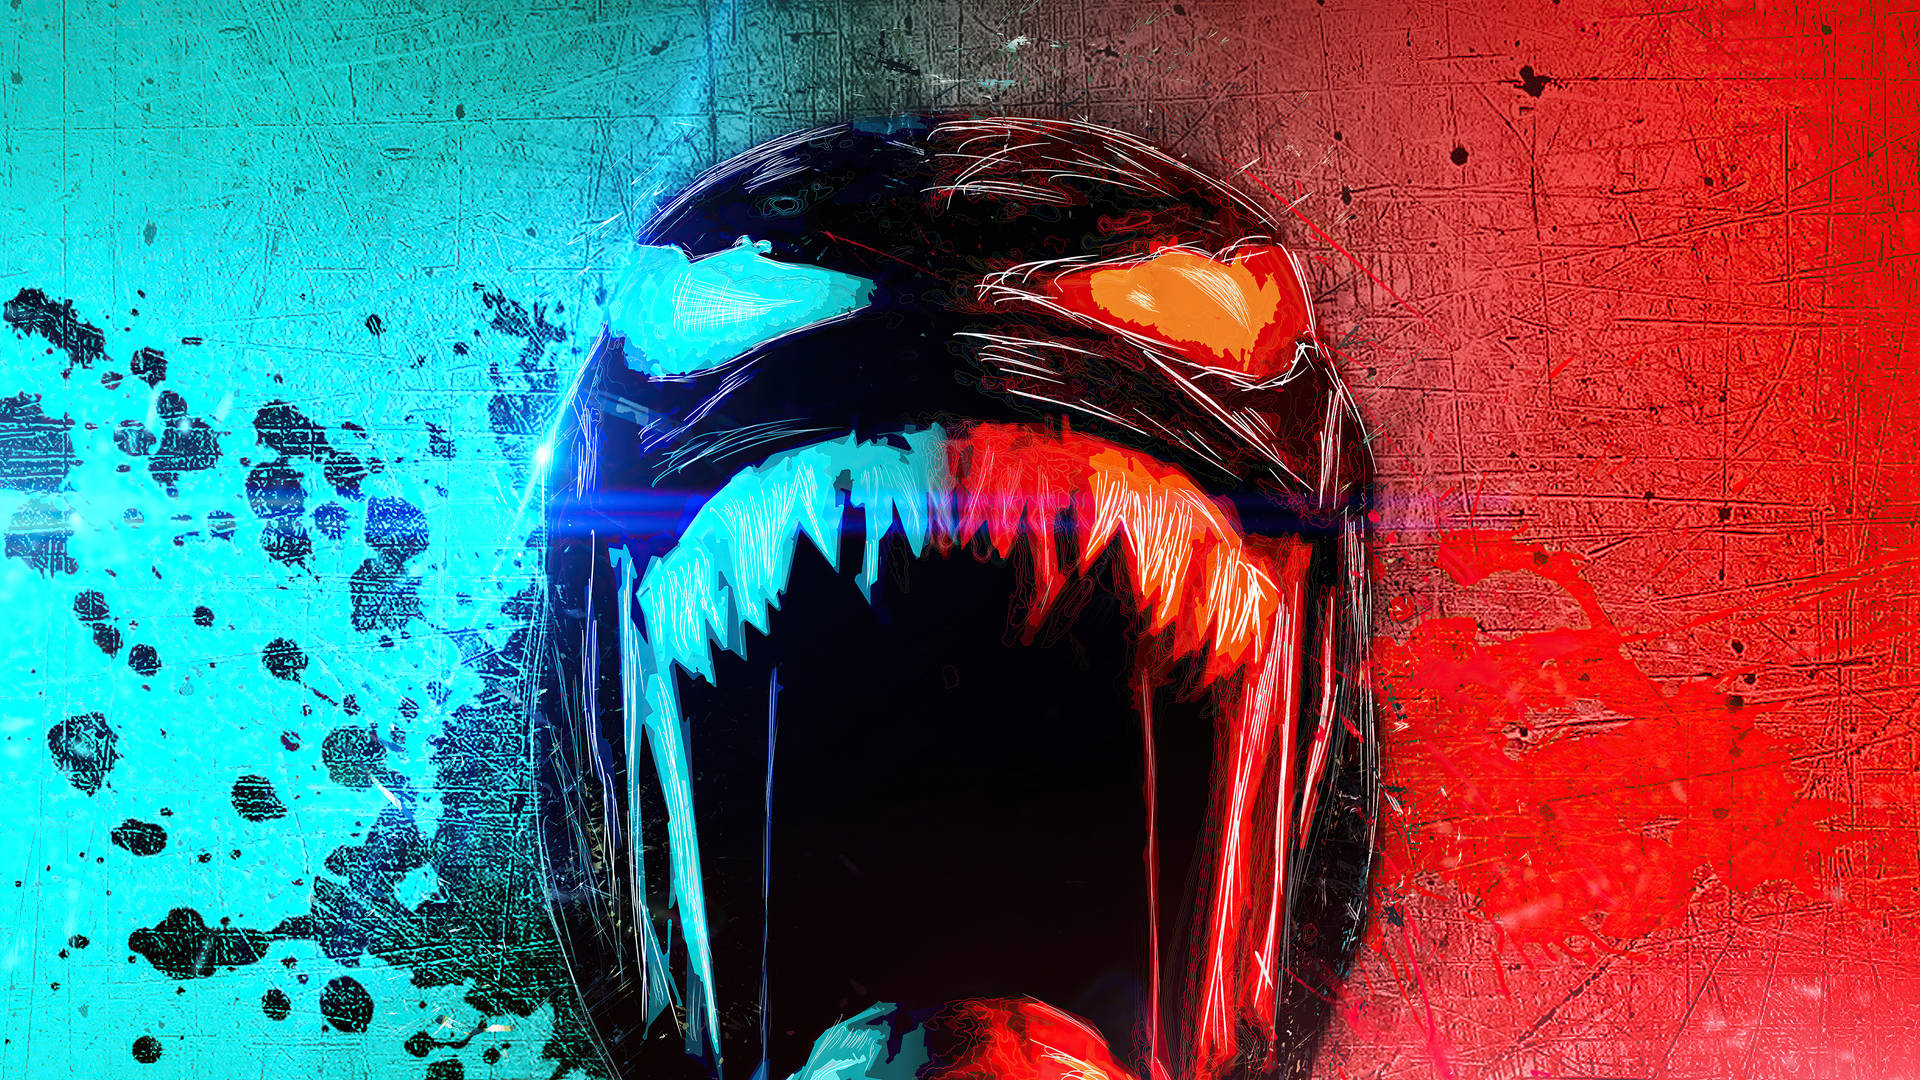 Top 999+ Venom Let There Be Carnage Wallpapers Full HD, 4K✅Free to Use